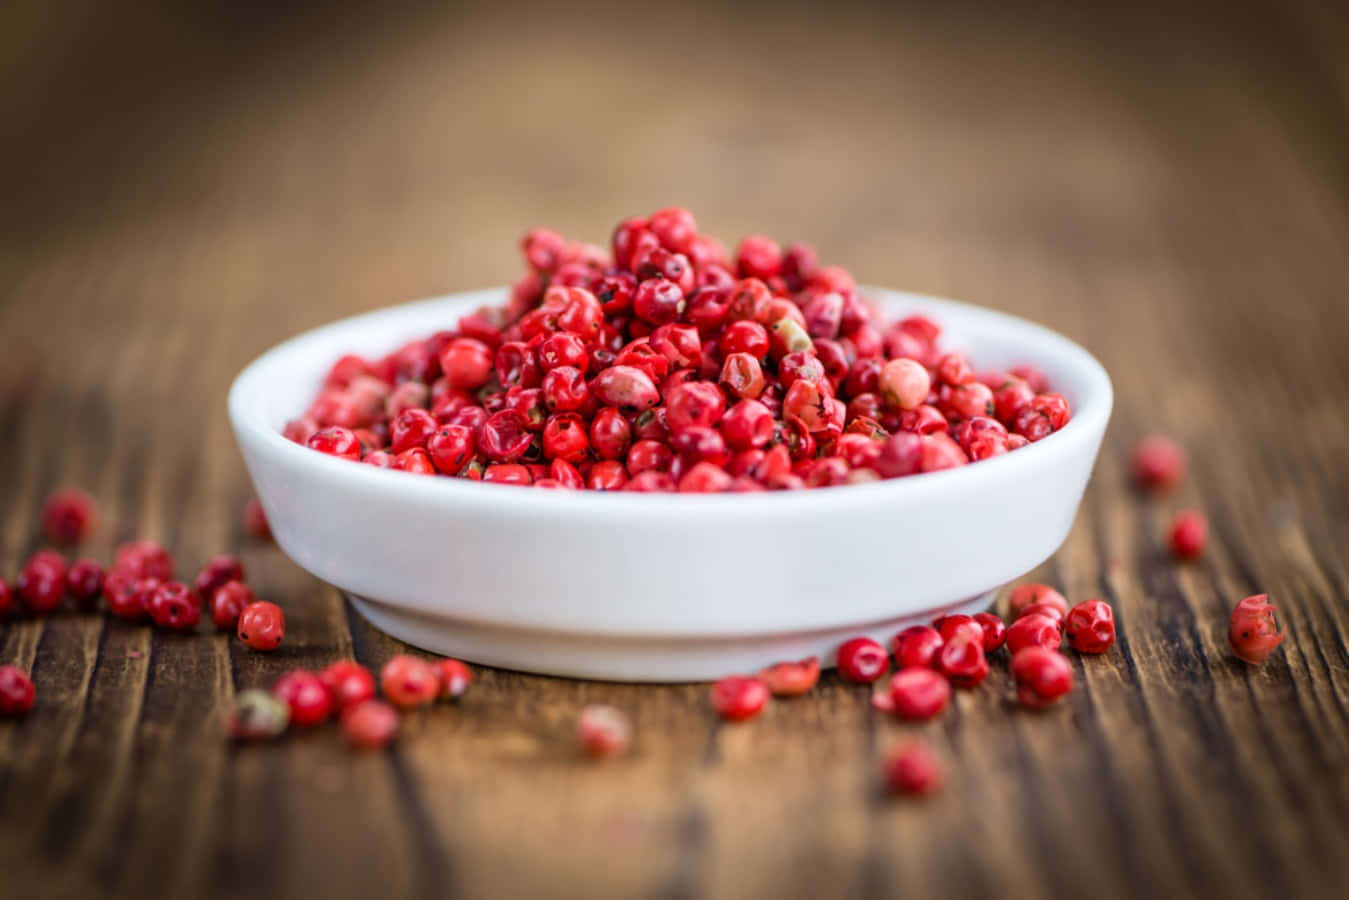 A close-up of pink peppercorns on a wooden surface Wallpaper